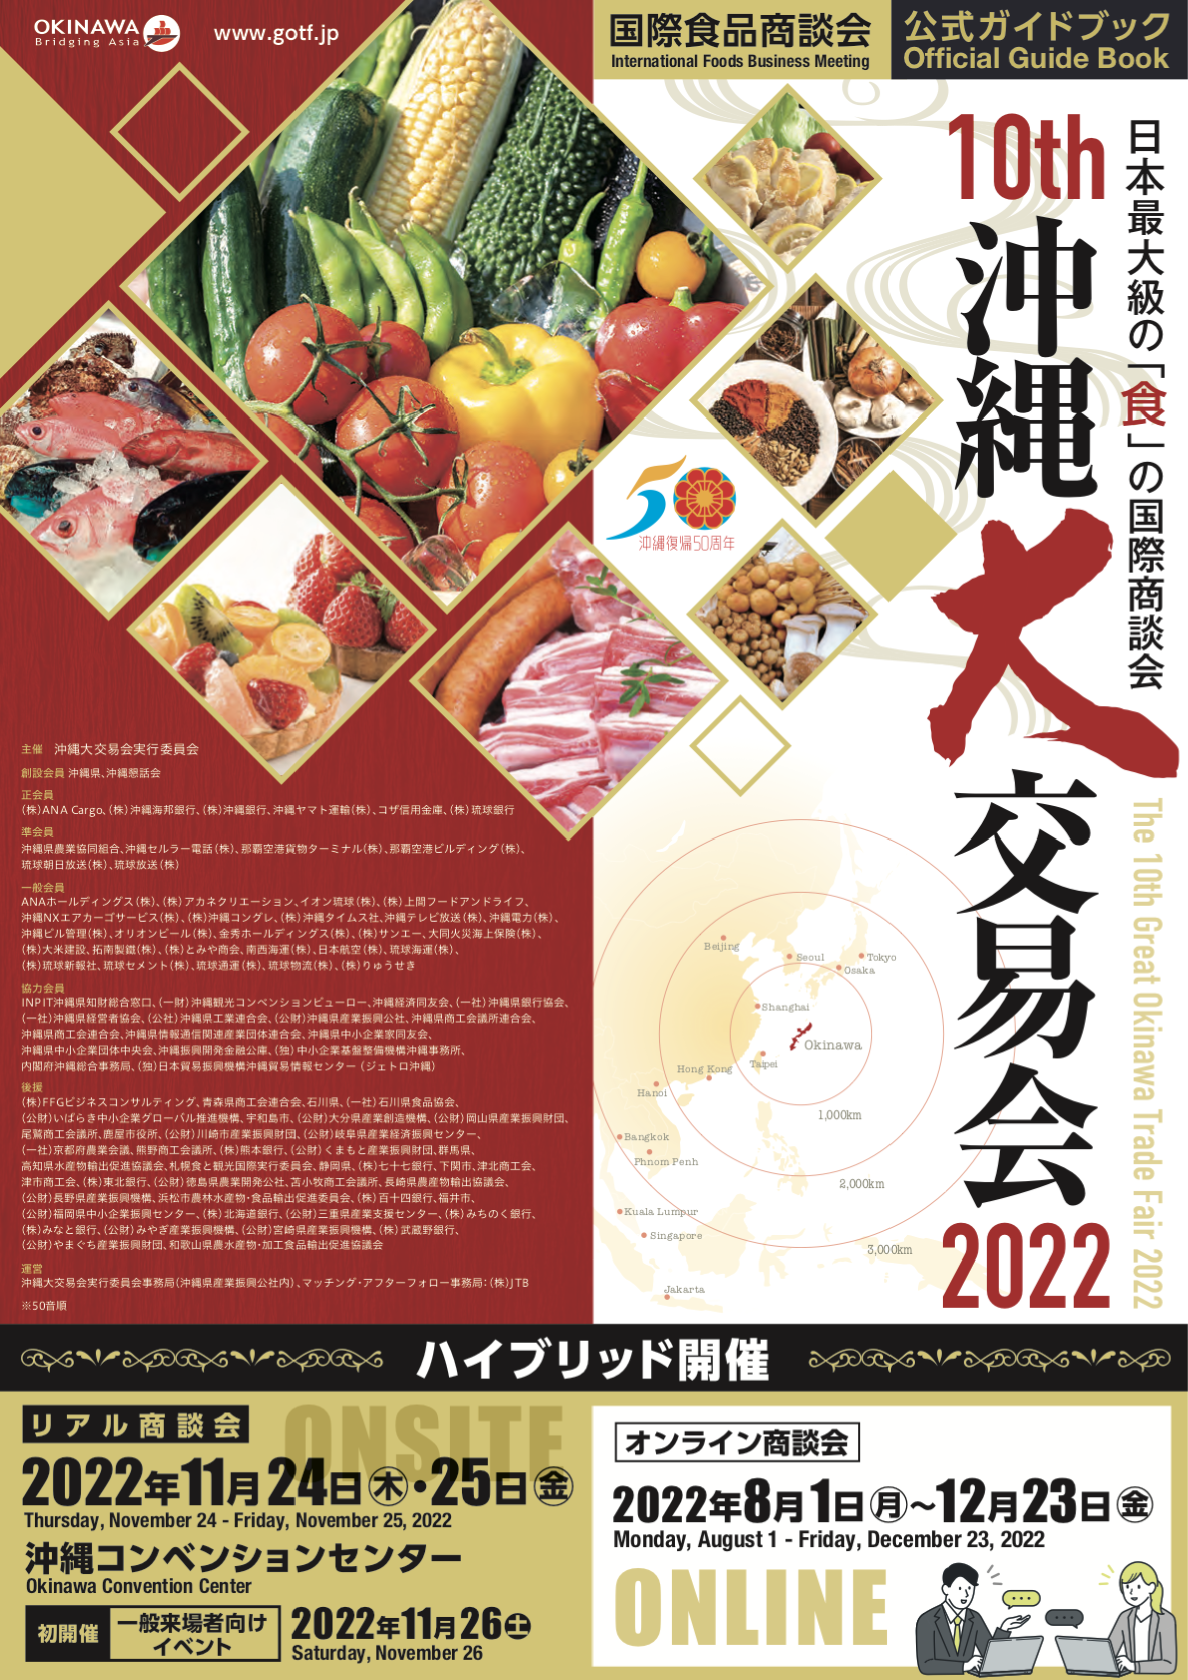 The Great Okinawa Trade Fair 2022 Official Guide Book